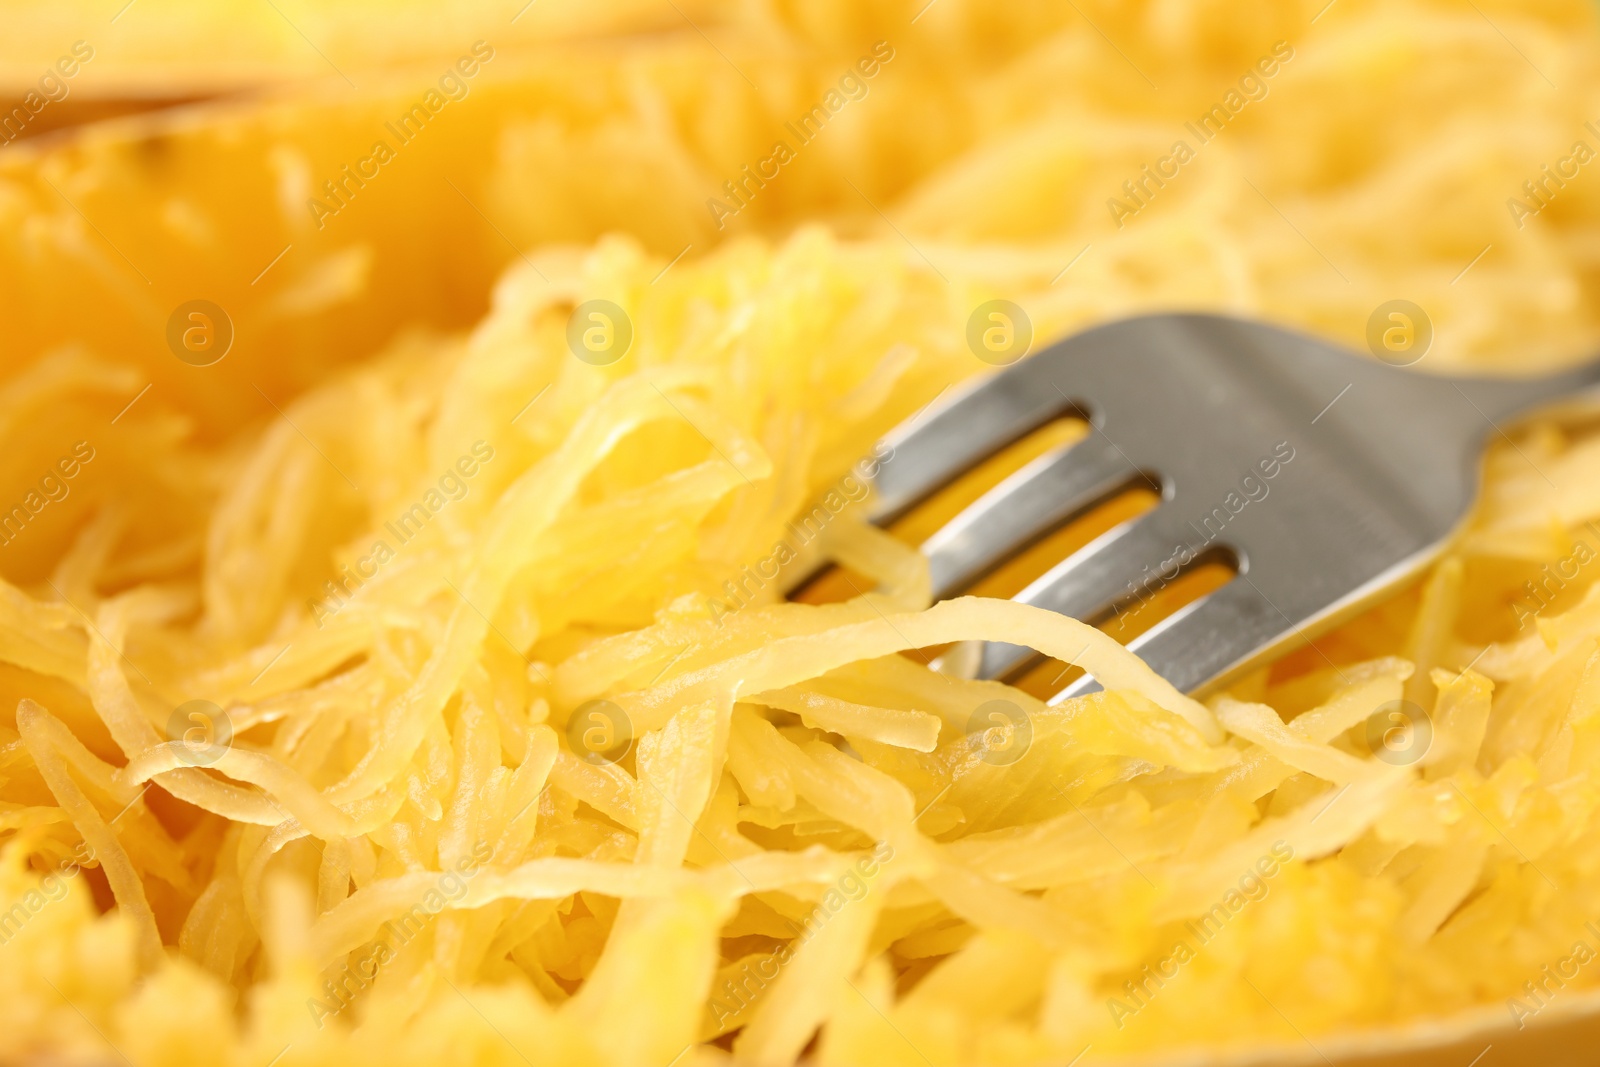 Photo of Tasty cooked spaghetti squash and fork, closeup